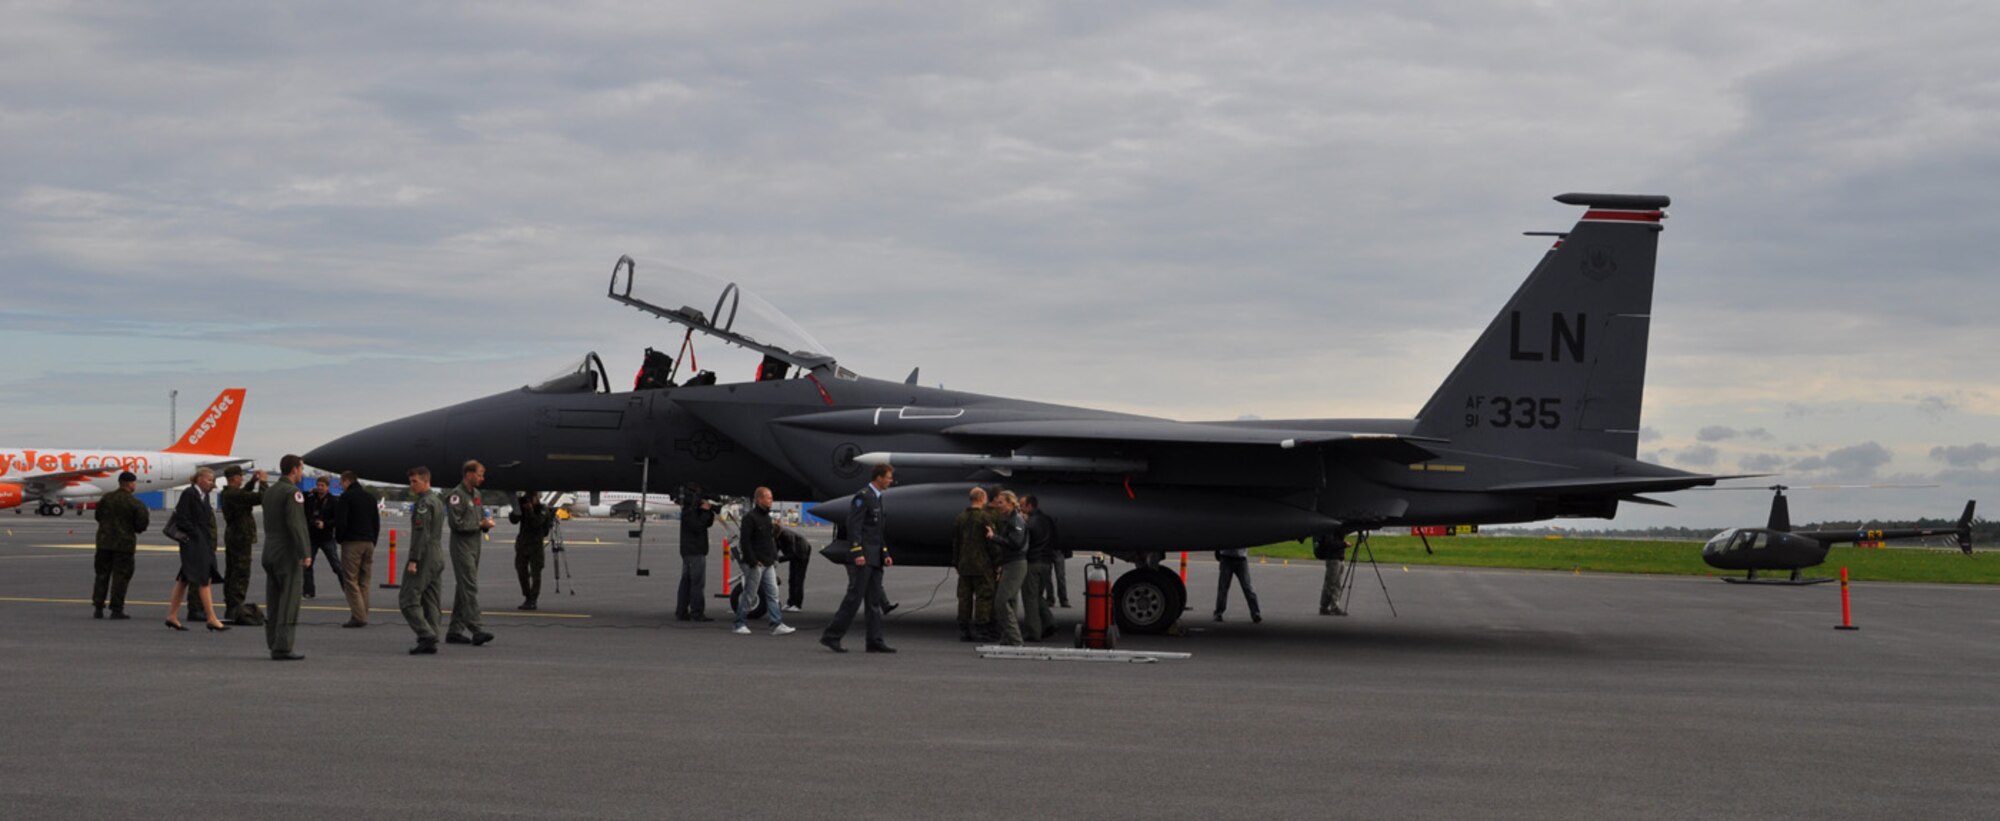 An F-15E fighter jet from the 494th Fighter Squadron sits on the ramp at Tallinn International Airport, Estonia, after flying from its home base, RAF Lakenheath, United Kingdom, and performing a two hour training mission with Estonia forward air controllers (FAC), known as joint terminal attack controllers to the U.S. military. The aircrew prepares to be shuttled in an Estonian Robinson R44 helicopter, in the background, to the training area to debrief the FAC's. The purpose of the training is to enhance the abilities of Estonian FAC's and ground commanders in employing NATO air strike assets. (U.S Air Force photo/Lt. Col. Jim Parker)